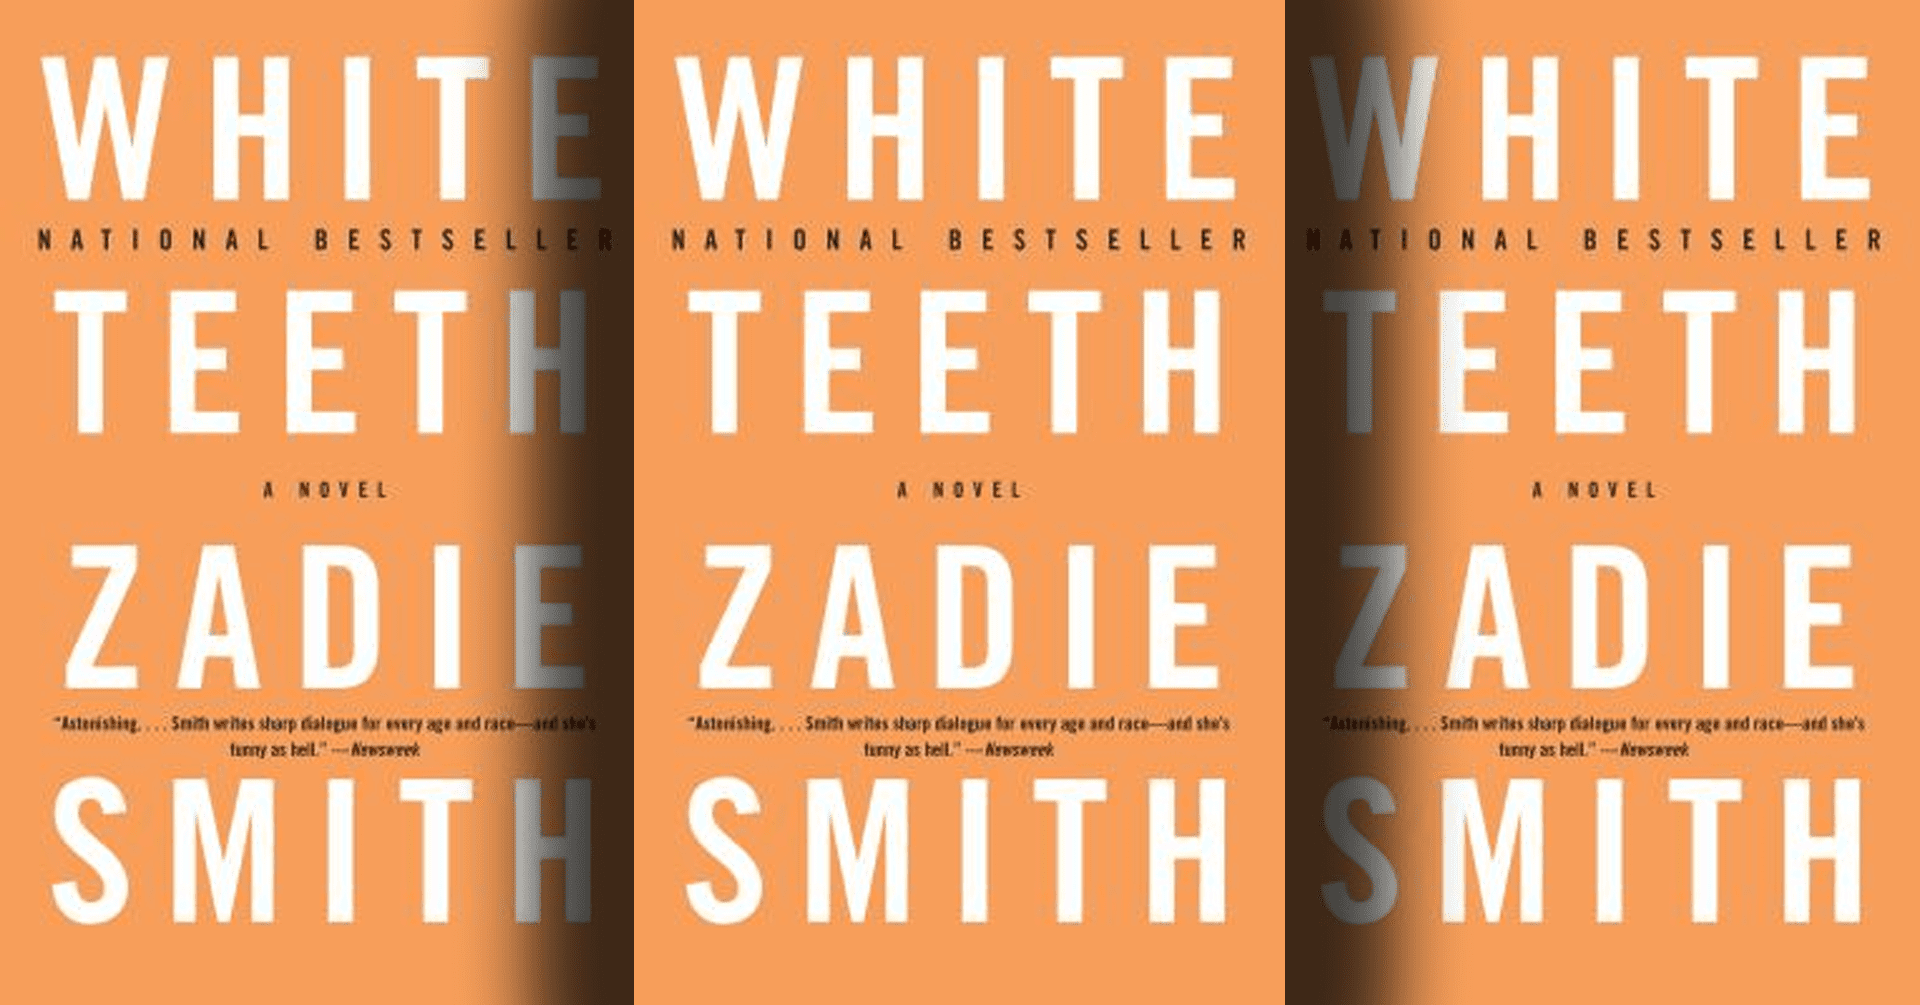 White Teeth by Zadie Smith (book cover)